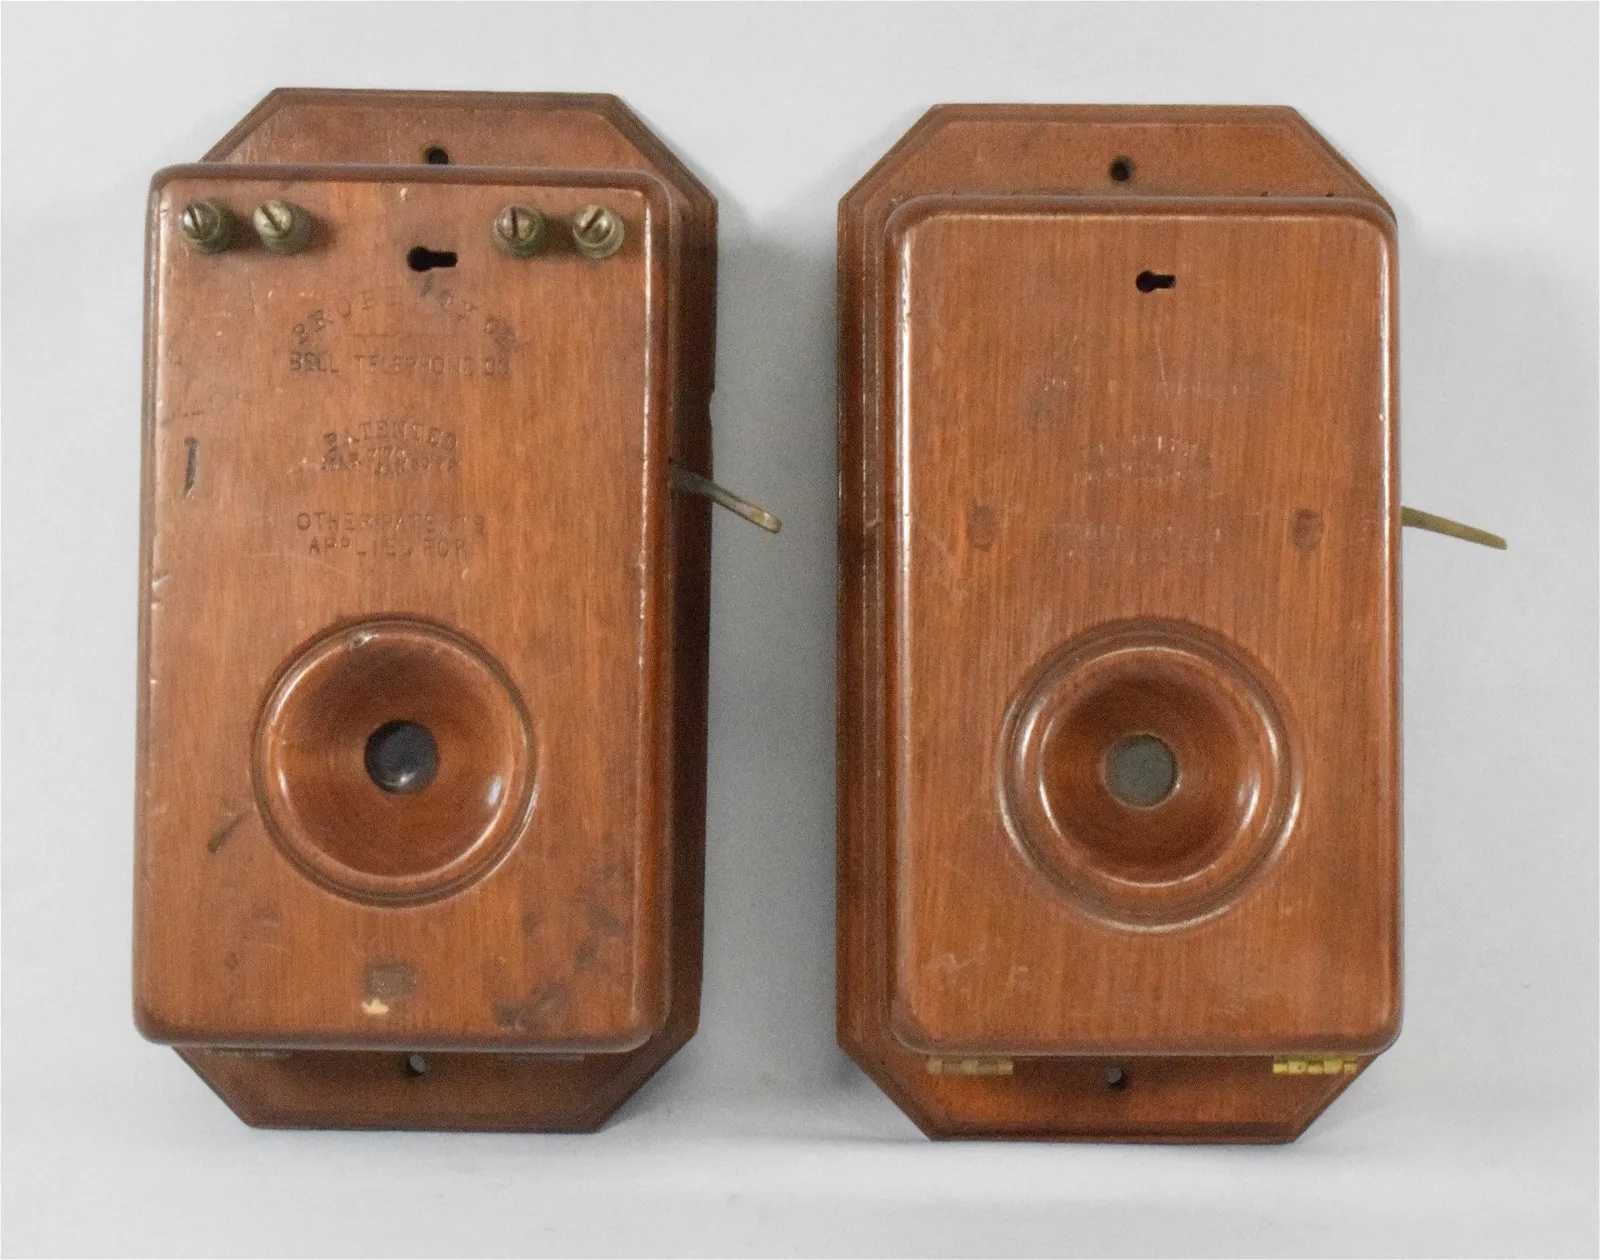 Bell telephones from the 1870s answered the call at White&#8217;s Auctions